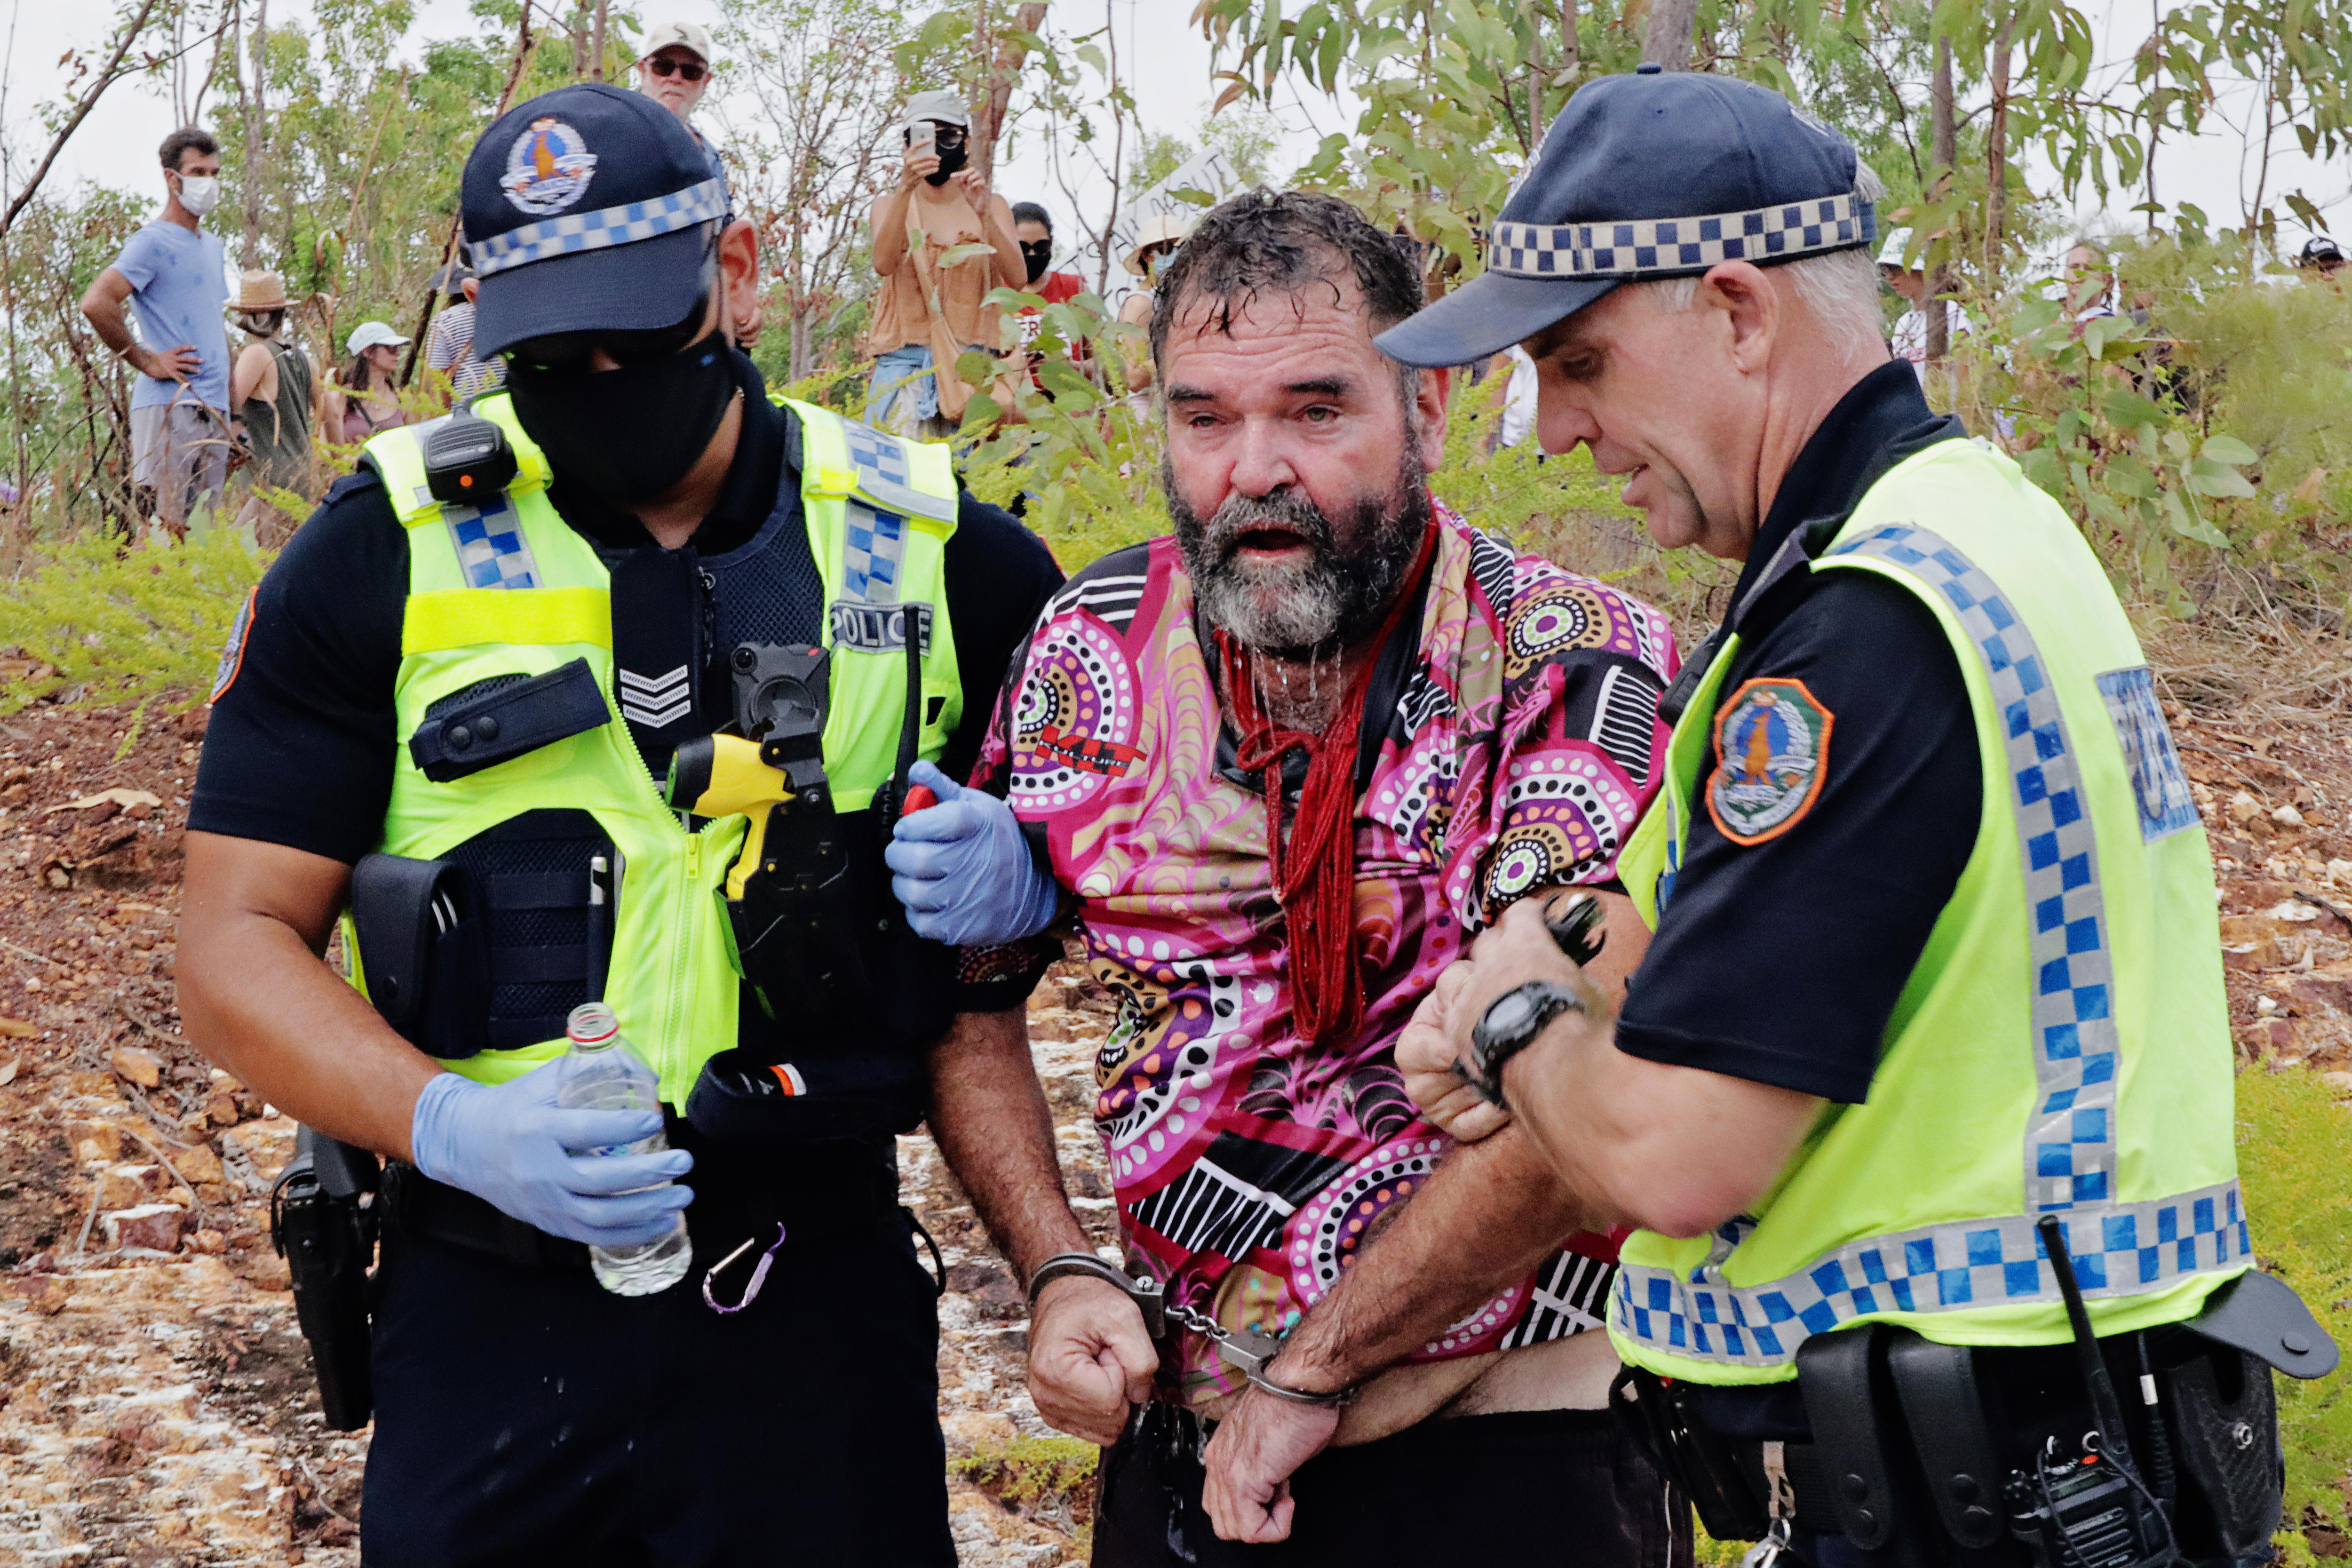 NT police use pepper spray on protestors at anti-vaccine rally in Darwin, arrest seven - ABC News